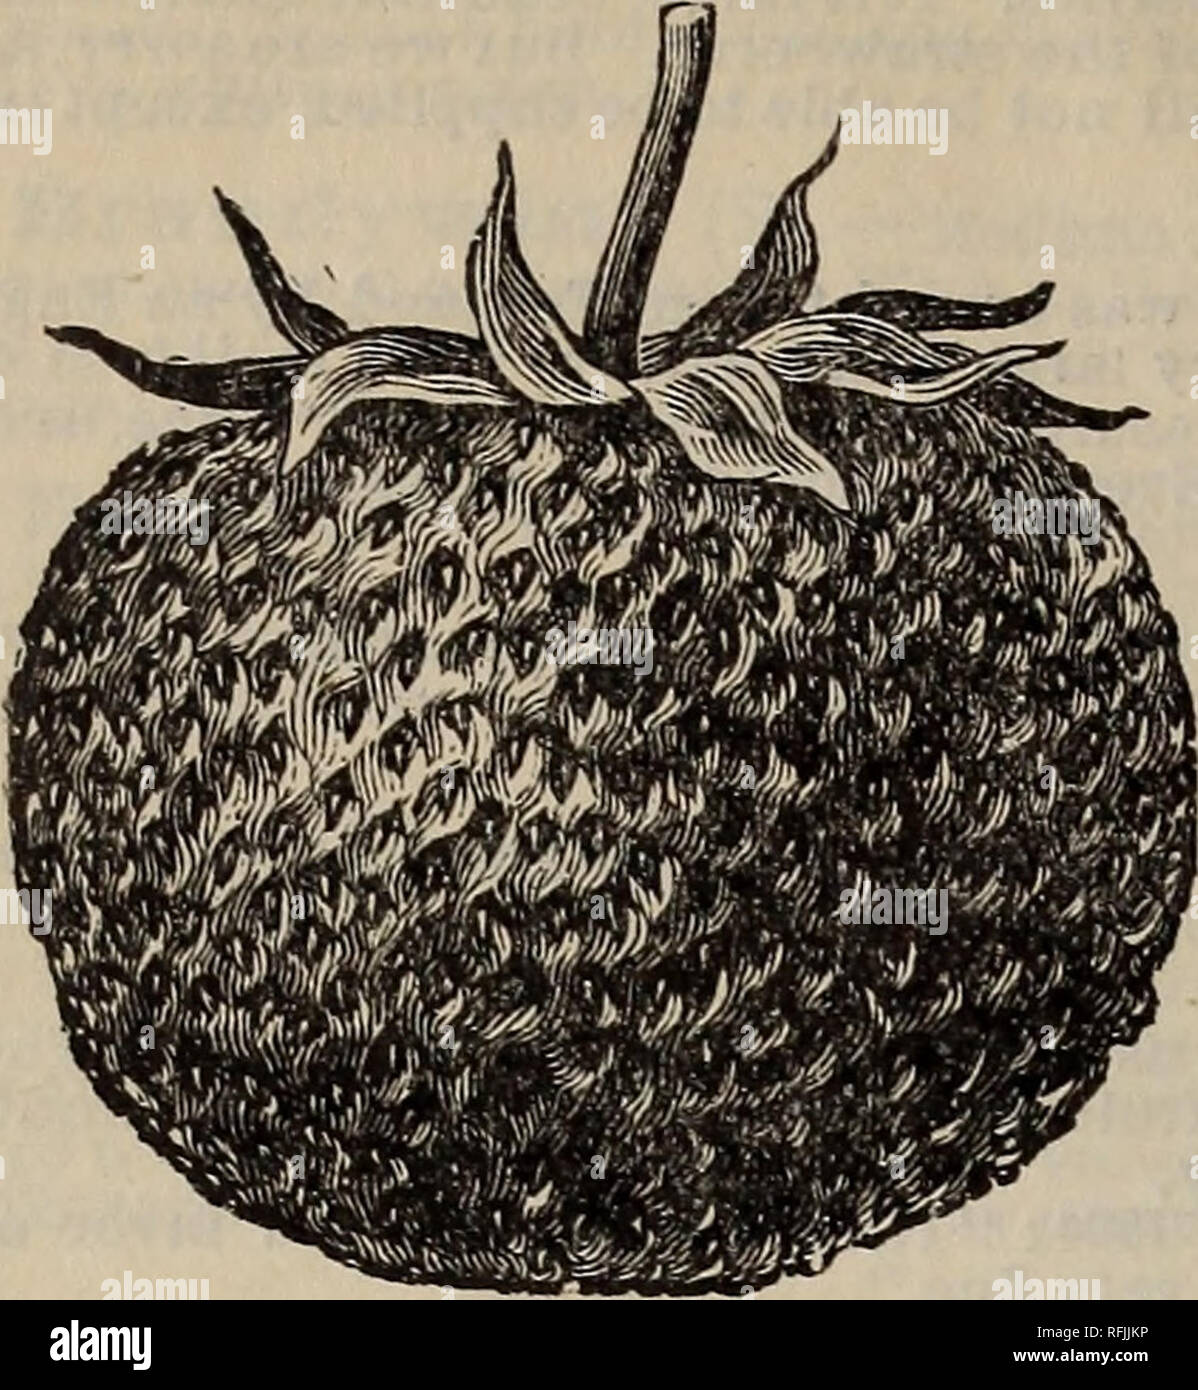 . Our twelfth annual wholesale catalogue for 1899 of strawberries, grapes, etc., etc.. Nursery stock Virginia Catalogs; Strawberries Catalogs; Grapes Catalogs; Fruit Catalogs. 10 Oh, have you heard the latest craze The berry has come that all should raise; Its time is not brief, it has come to stay, Then send in your orders without further delay. Oh Earliest. Oh Earliest, the glory of the day, Your time is not limited, you surely have come to stay. Your luxuriant growth and foliage so green, Not tarnished by rust, we have never seen A plant so early, Oh that is the sound Whose large clusters c Stock Photo